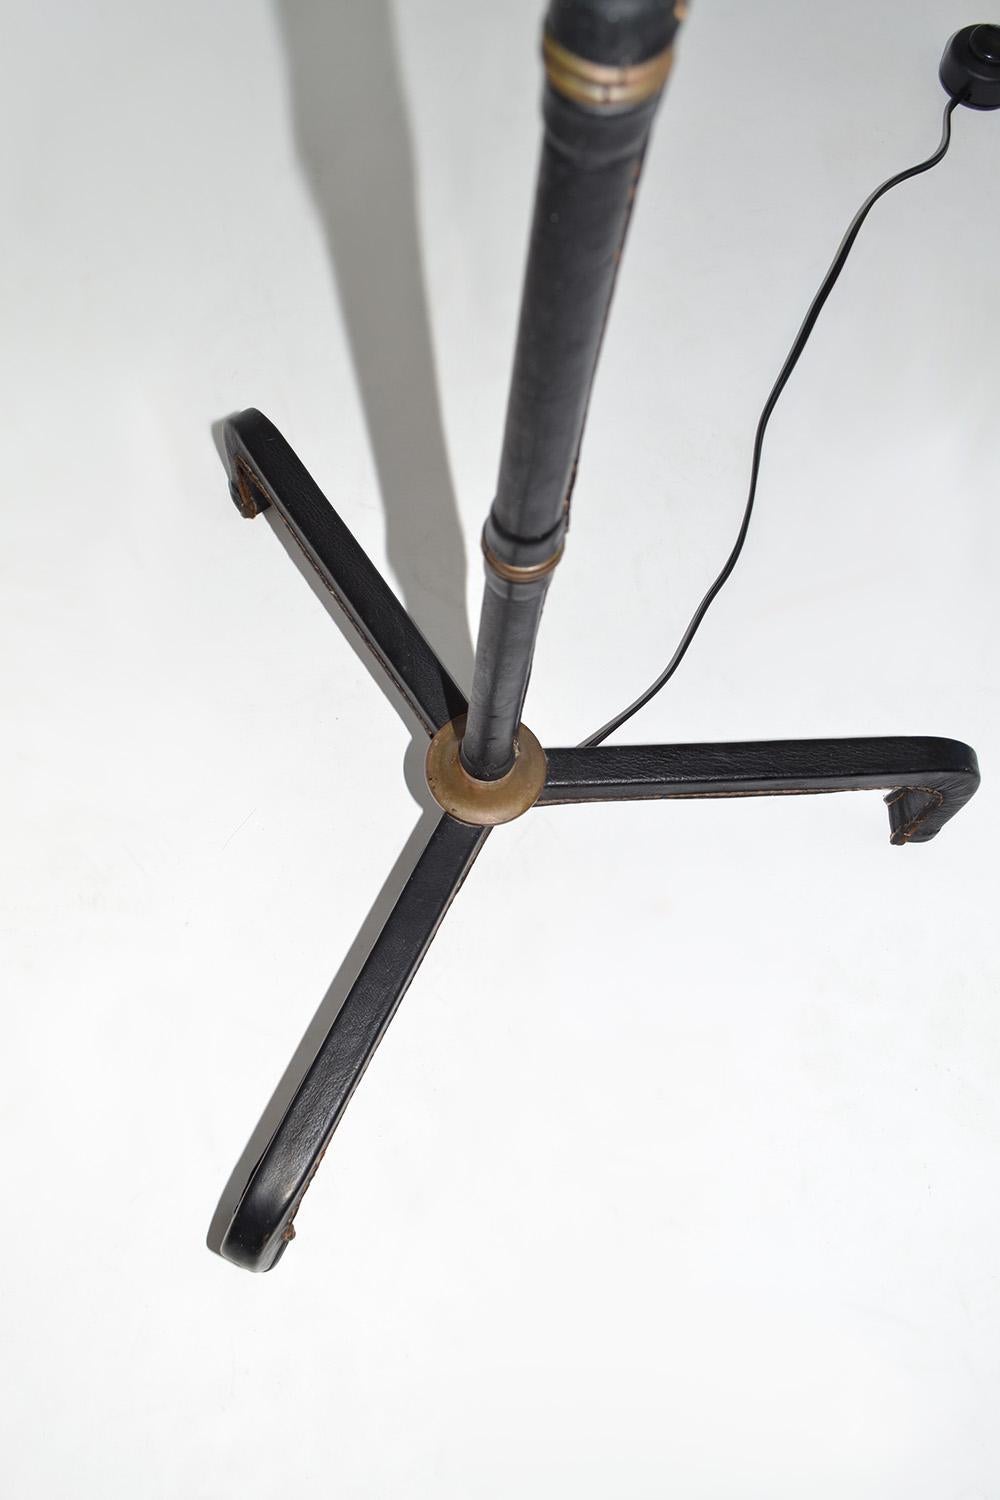 Metal Jacques Adnet Leather Wrapped Floor Lamp, France c. 1950 For Sale